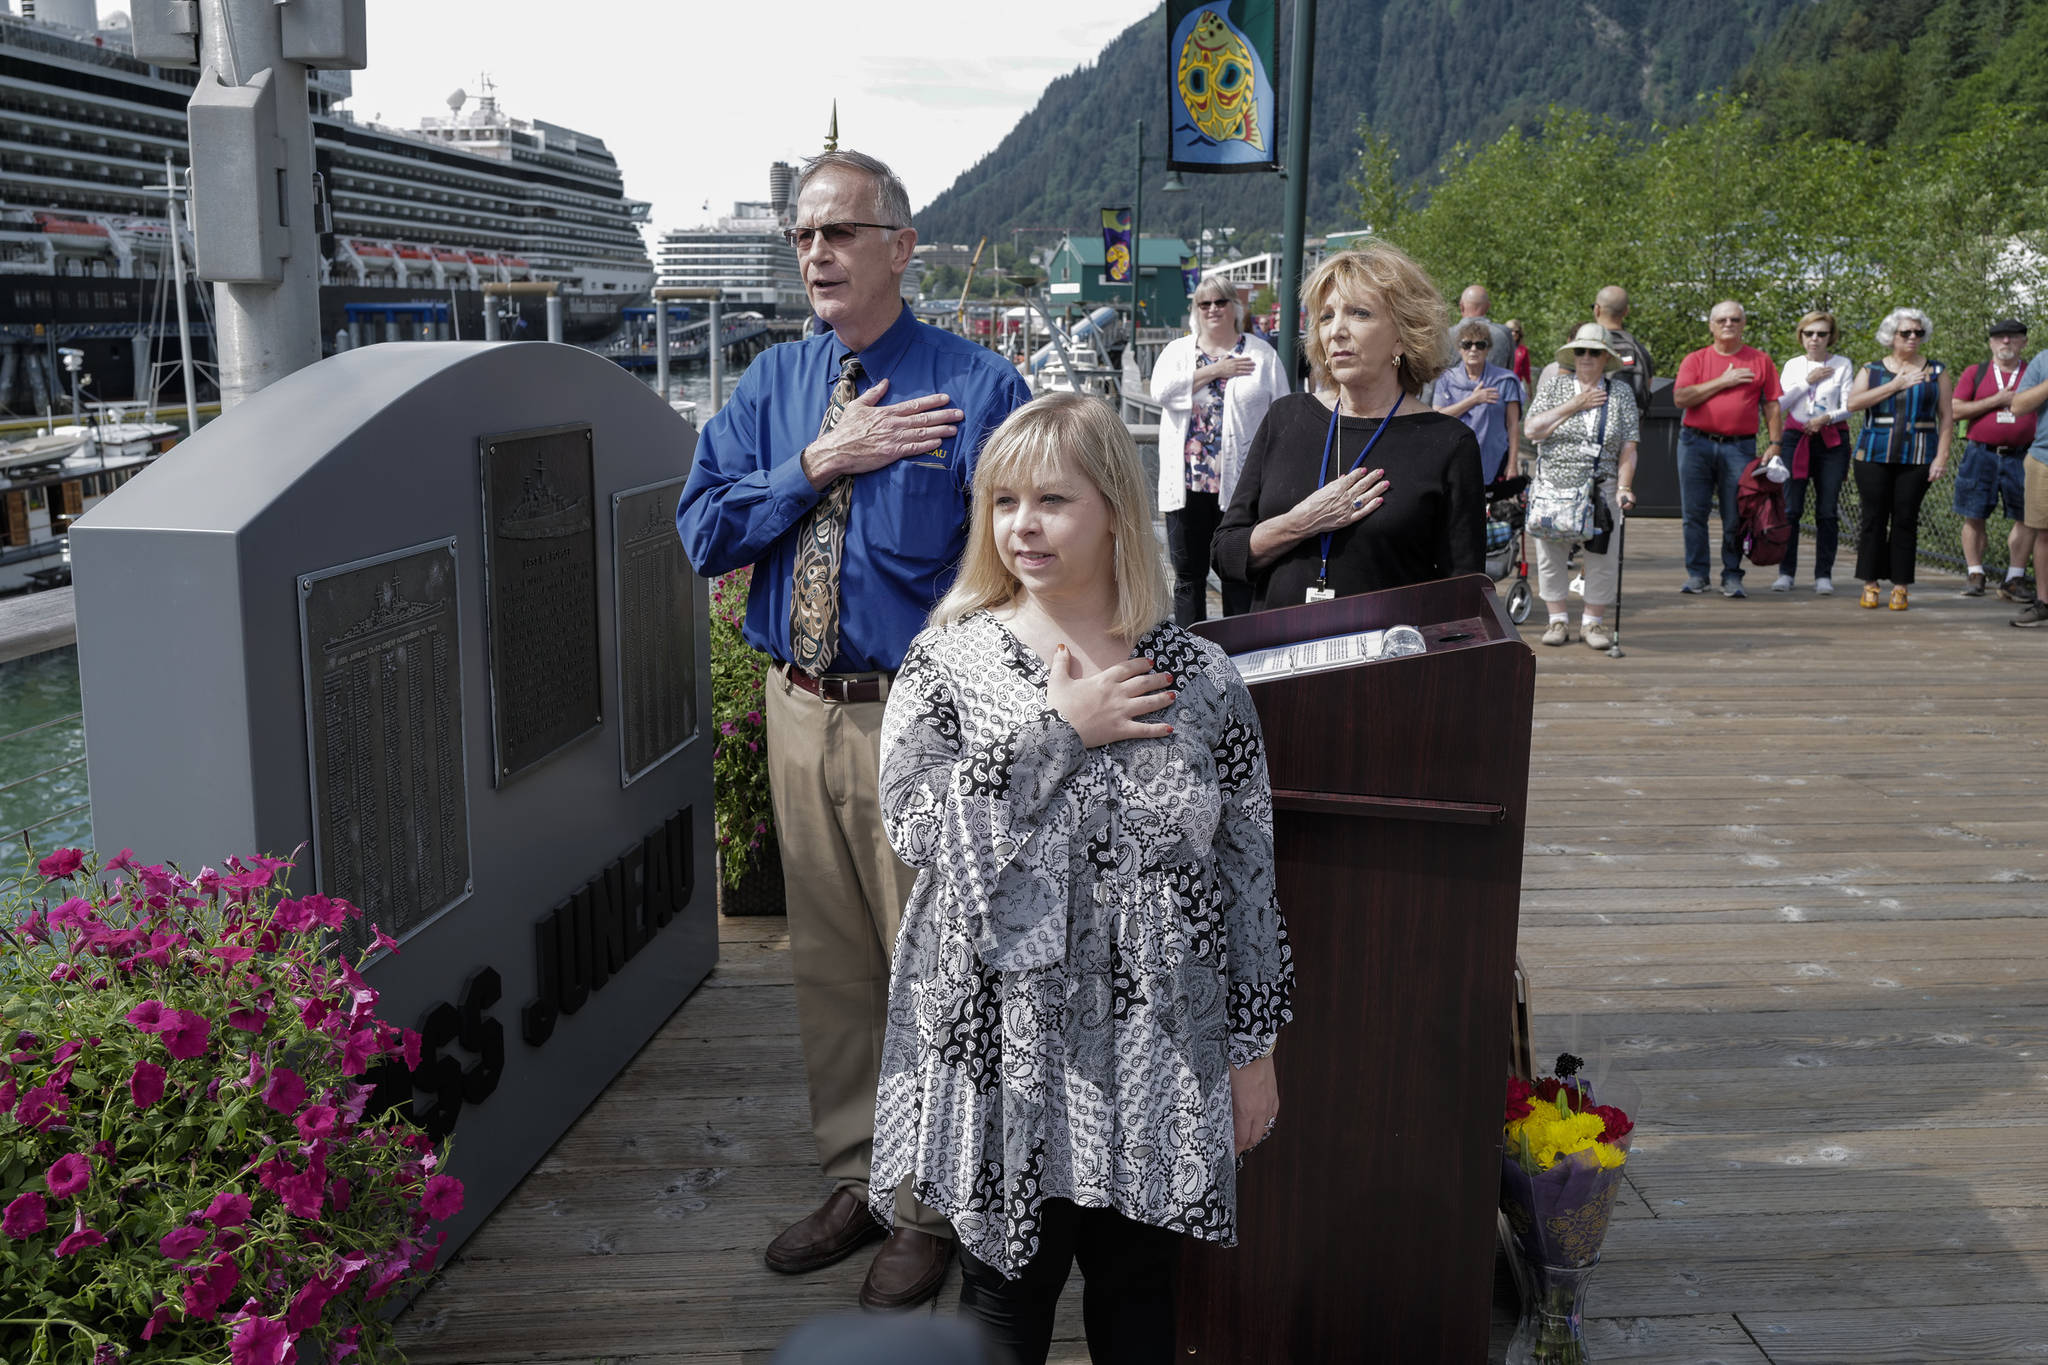 Ashley DeRamus, of Hoover, Alabama, leads the Pledge of Allegiance with her mother, Connie, and Juneau Port Director Carl Uchytil during a ceremony at the U.S.S. Juneau Memorial on the Seawalk on Monday, July 22, 2019. DeRamus, who has Down syndrome, has recited the Pledge and sung the Nation Anthem in all 50 states with Alaska being her 50th on Monday. DeRamus, through her Ashley DeRamus Foundation, works to increase awareness of Down syndrome and enlighten others about the rewards and positive contributions those with Down syndrome make to society. (Michael Penn | Juneau Empire)